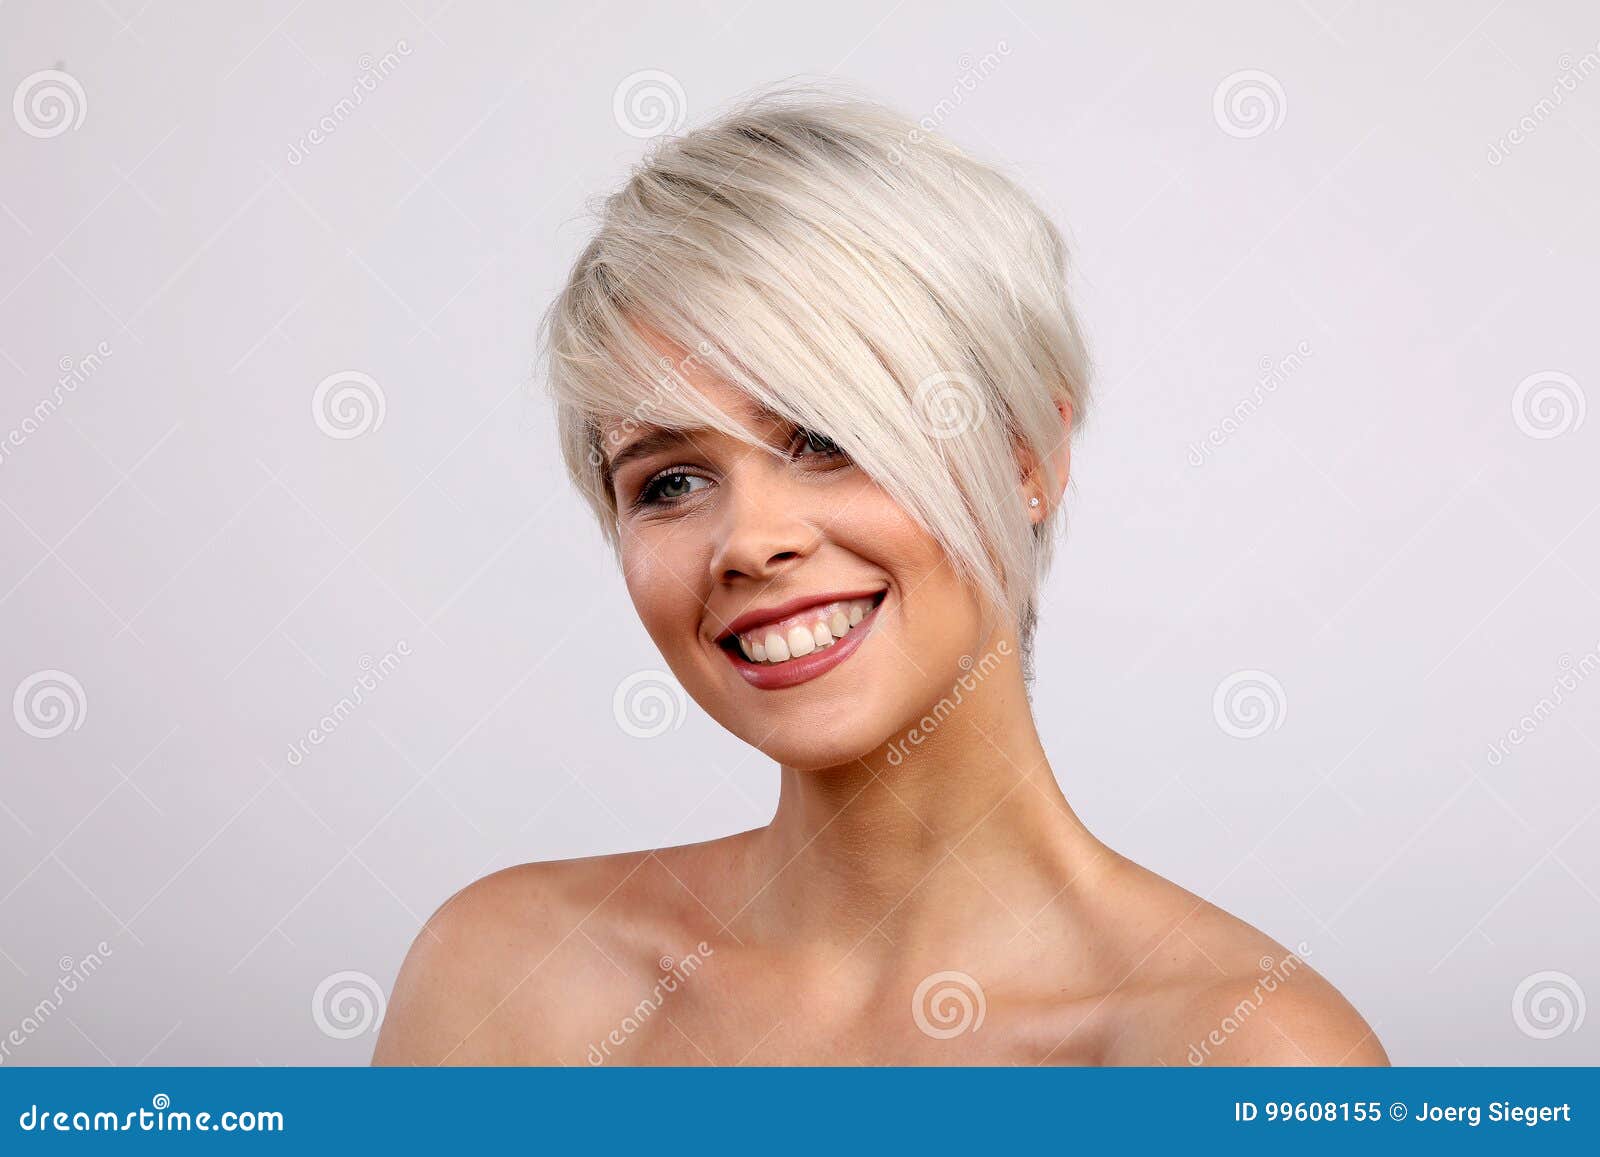 Beautiful woman naked shoulders looking up — Stock Photo 